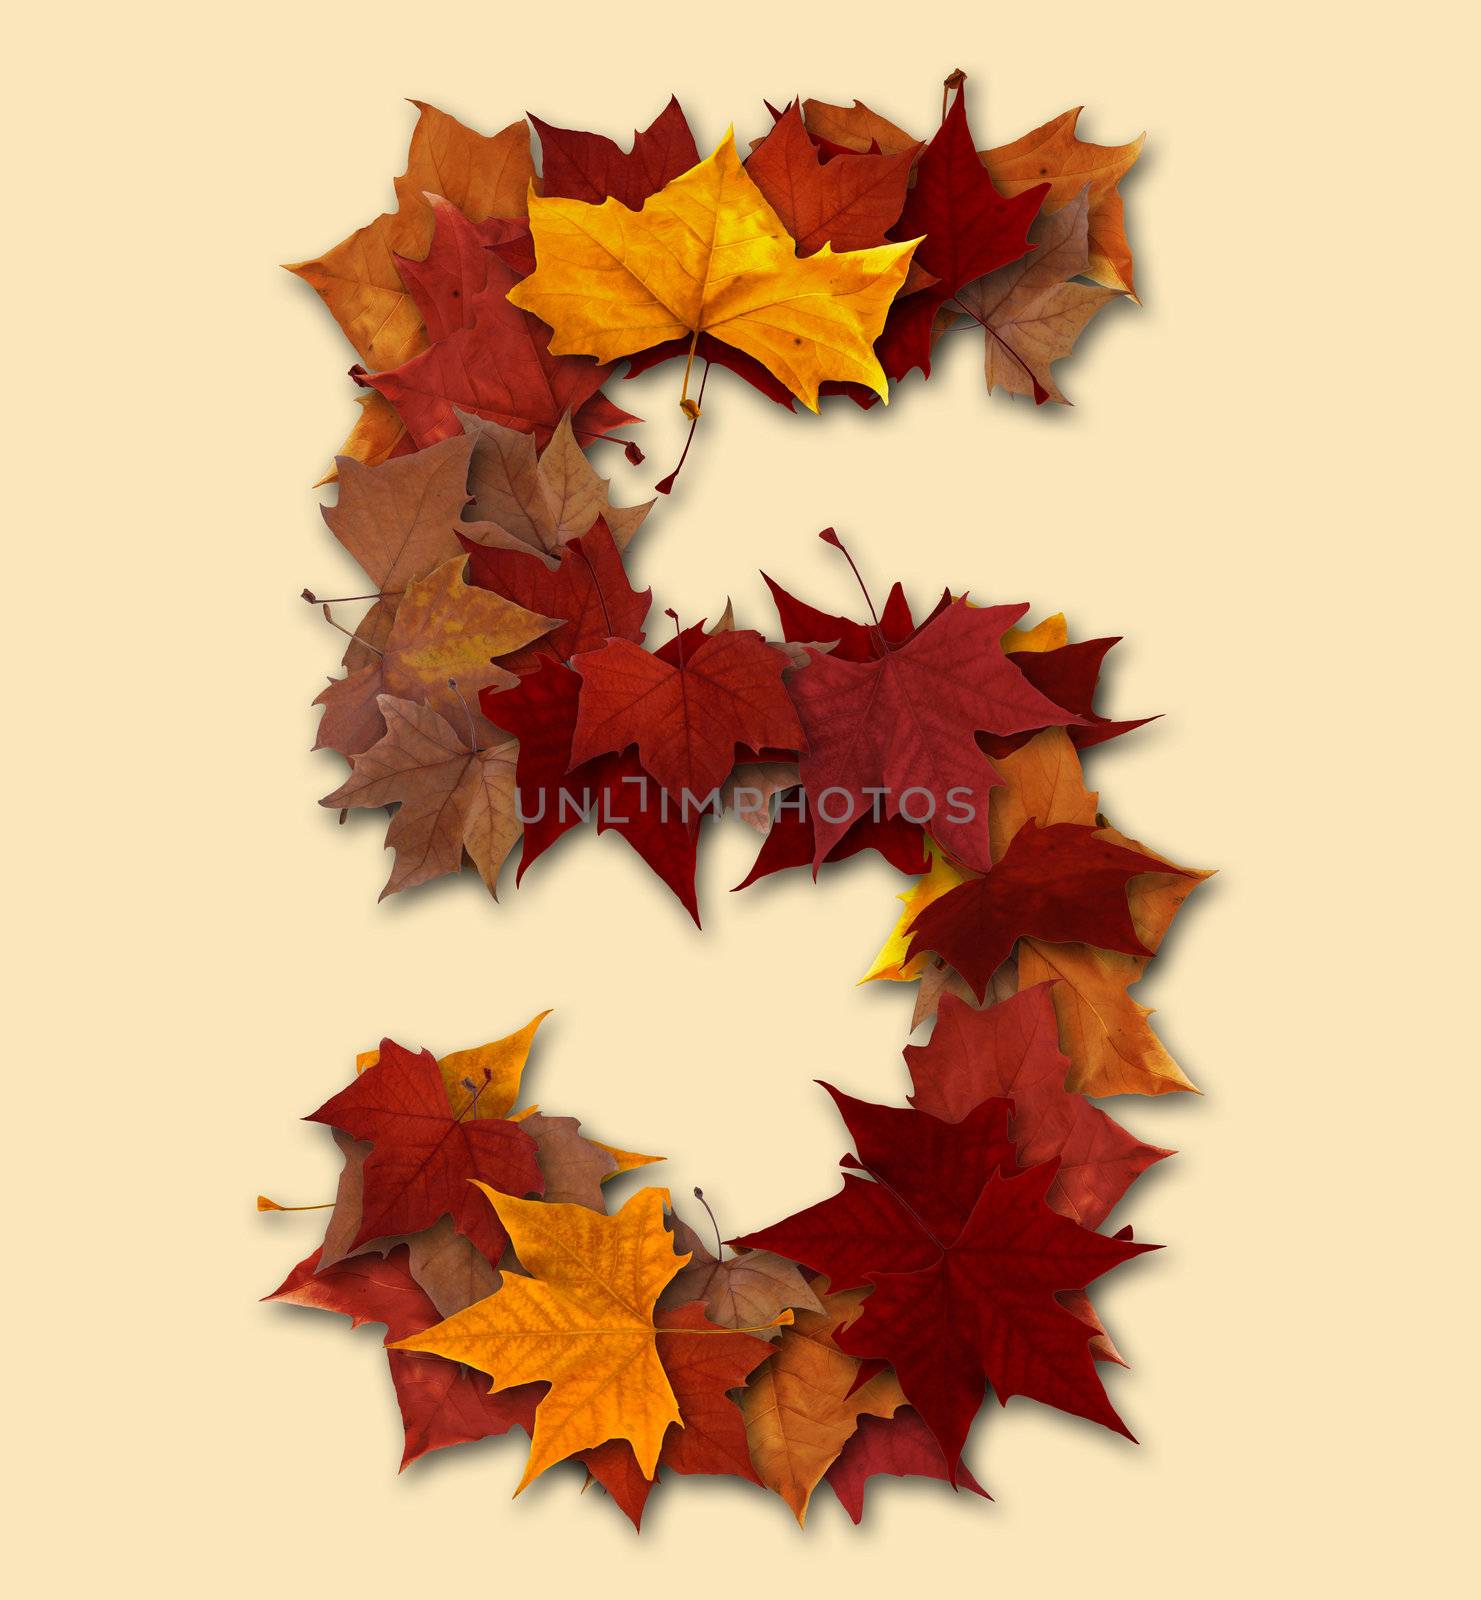 Number 5 drop shadow made with autumn leaves Isolated with clipping path, so you can easily cut it out and place over the top of a design. Find others types in our portfolio to compose your own words.